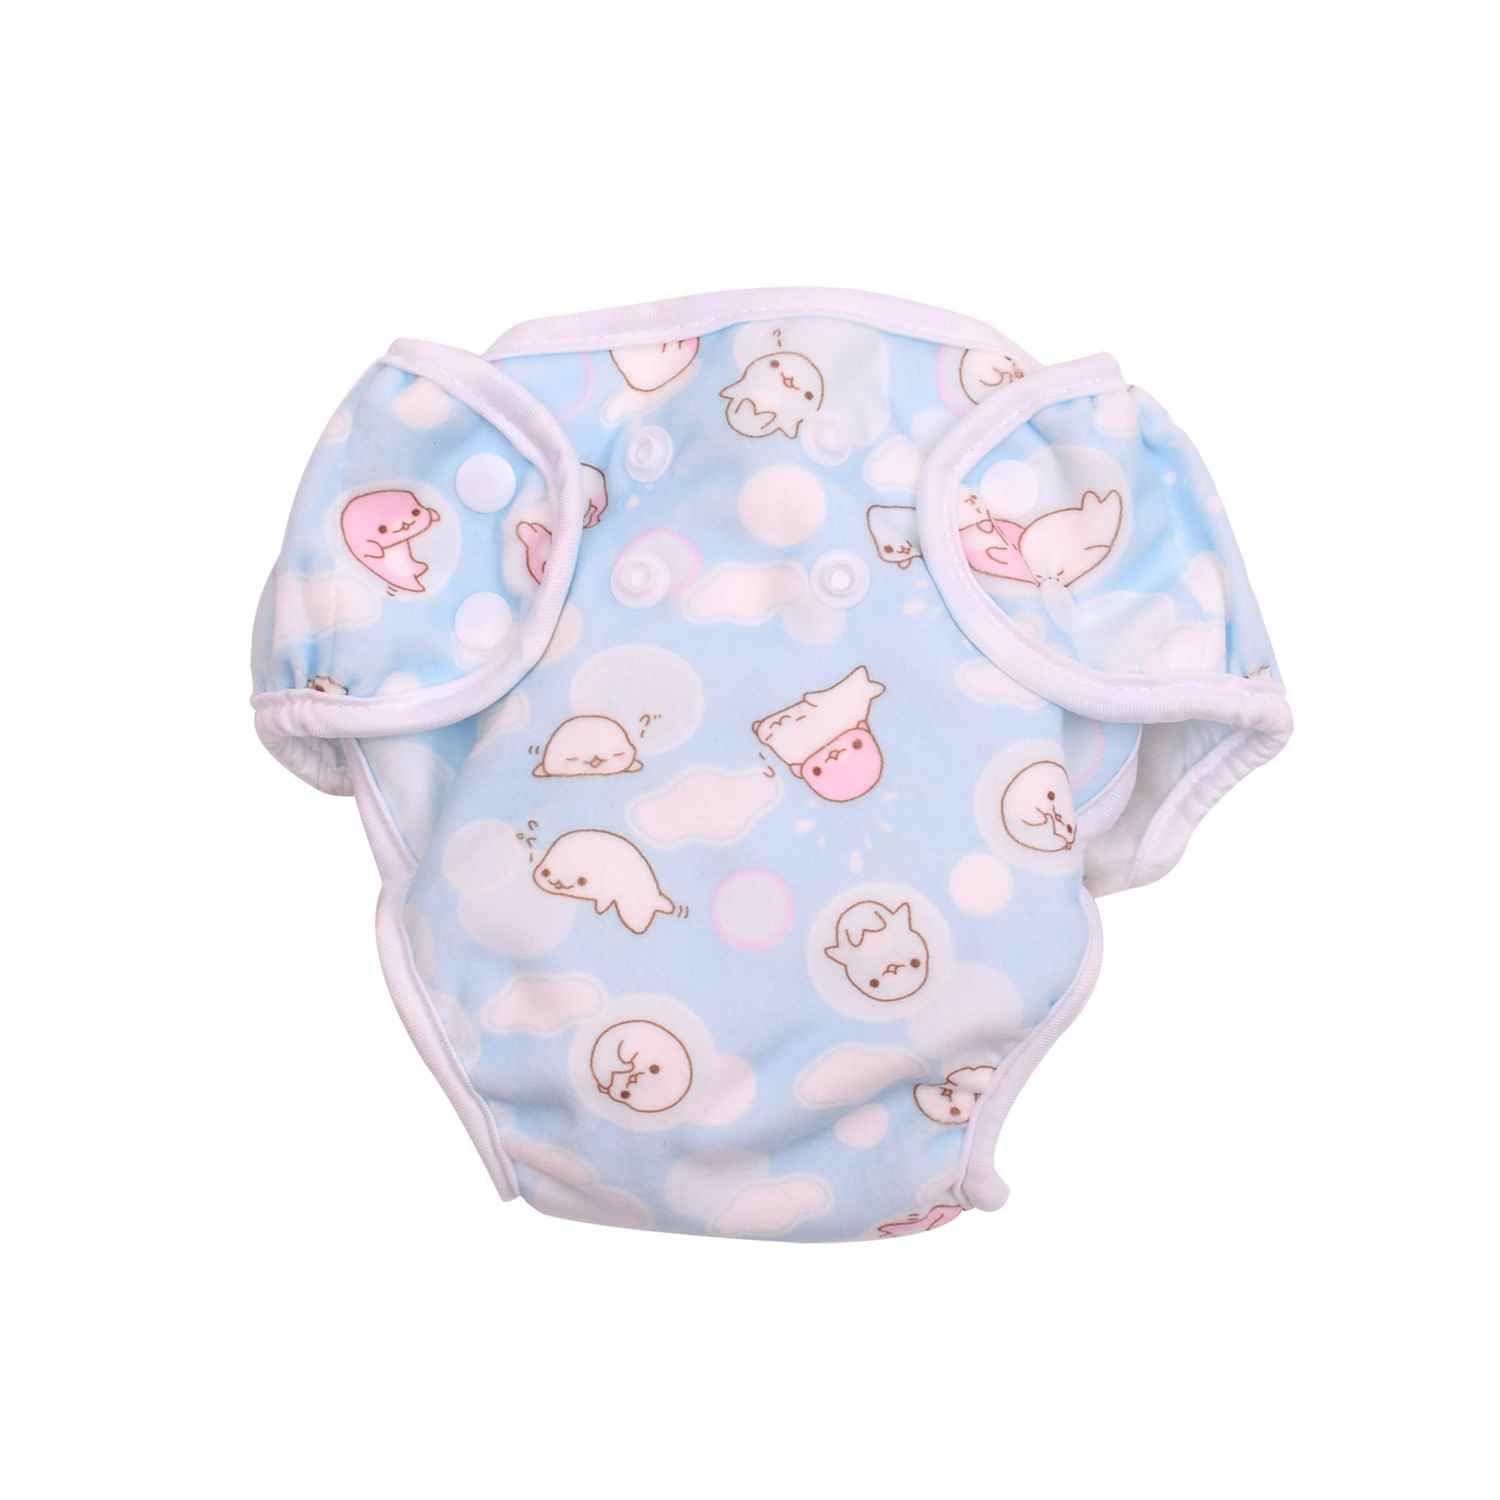 PAW PAW Baby Reusable Fabric Diaper with Pad, Size M (5-9kg)-Blue